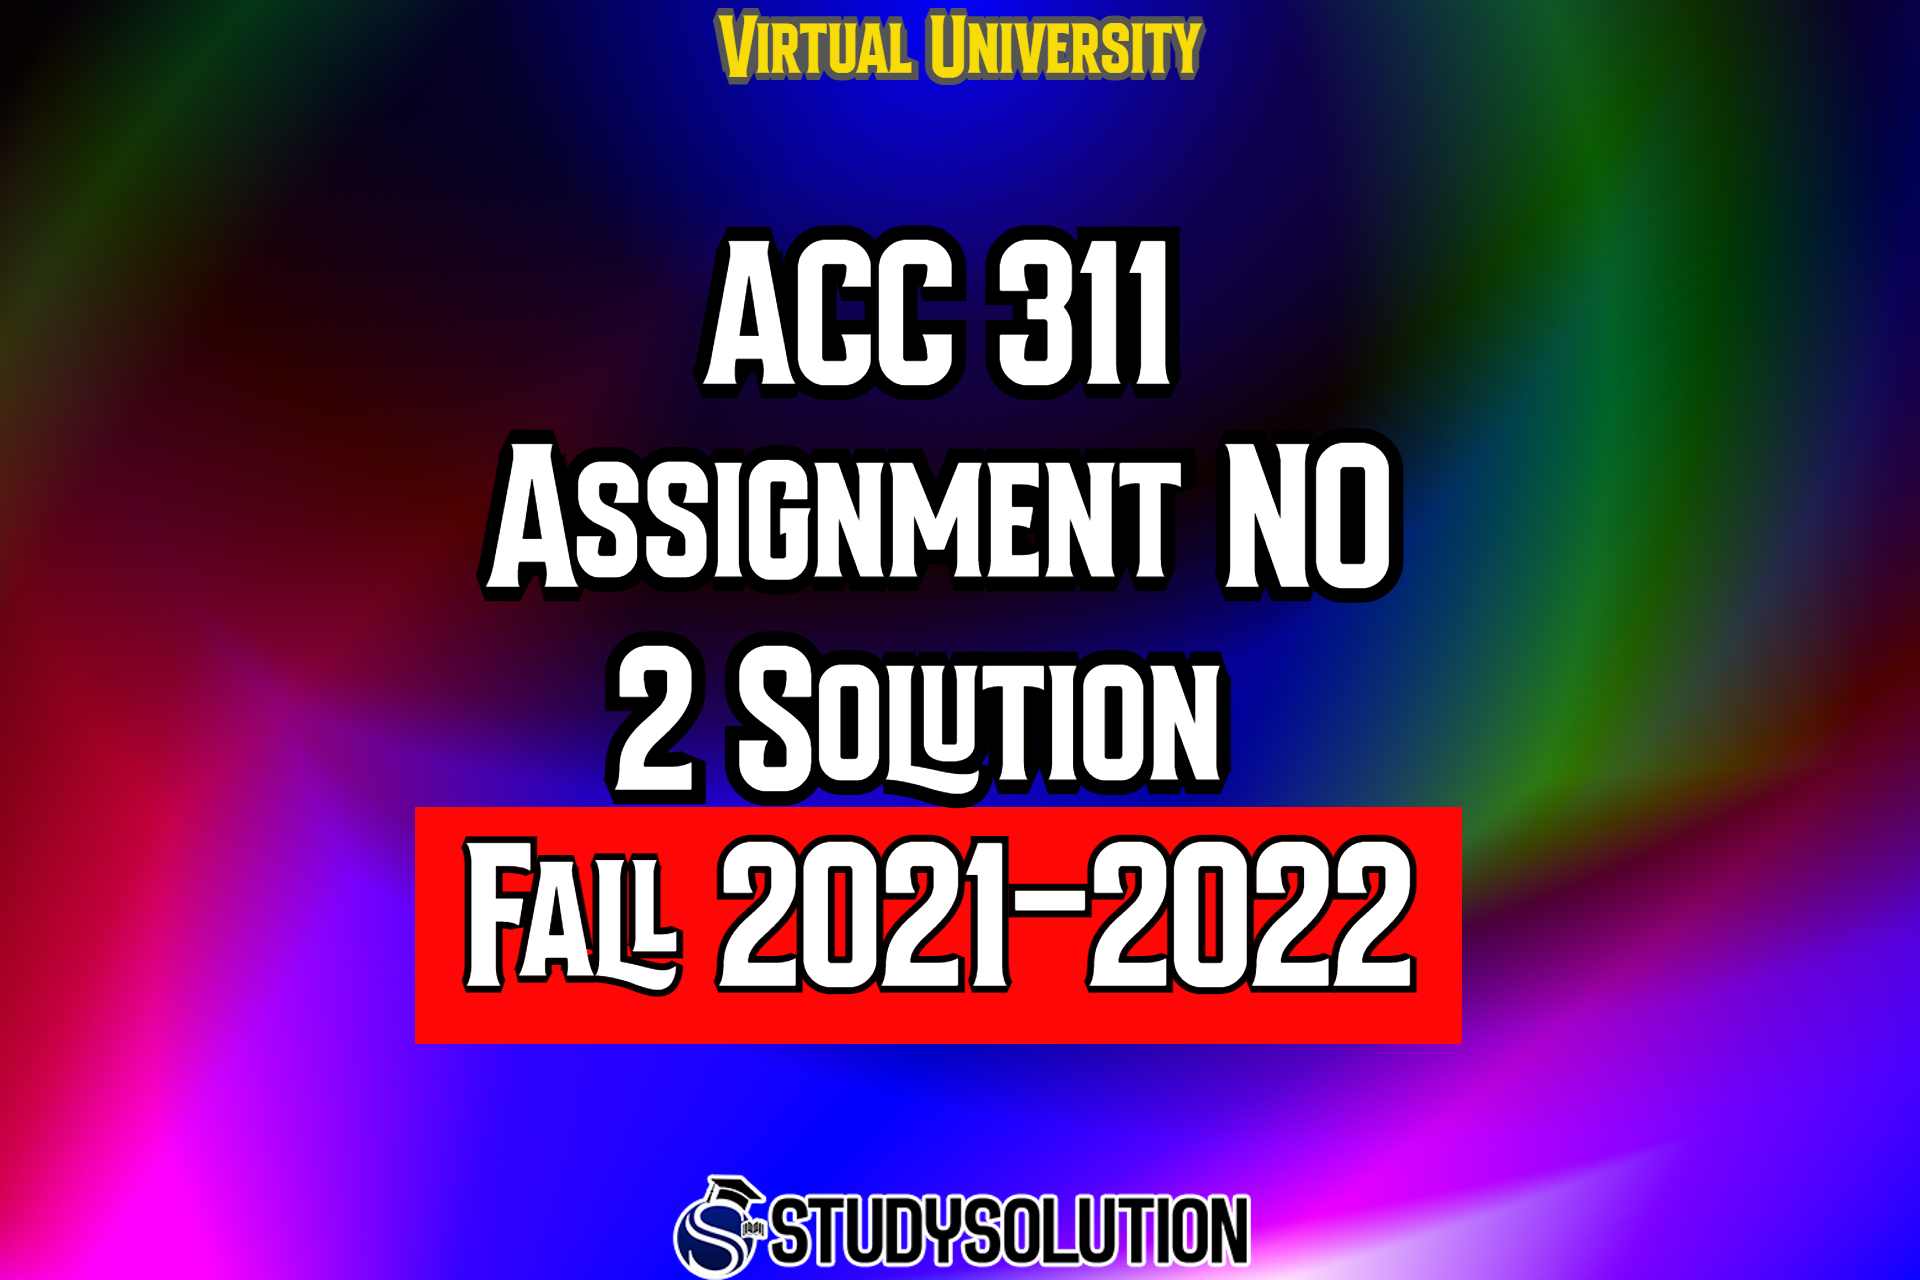 ACC311 Assignment No 2 Solution Fall 2022